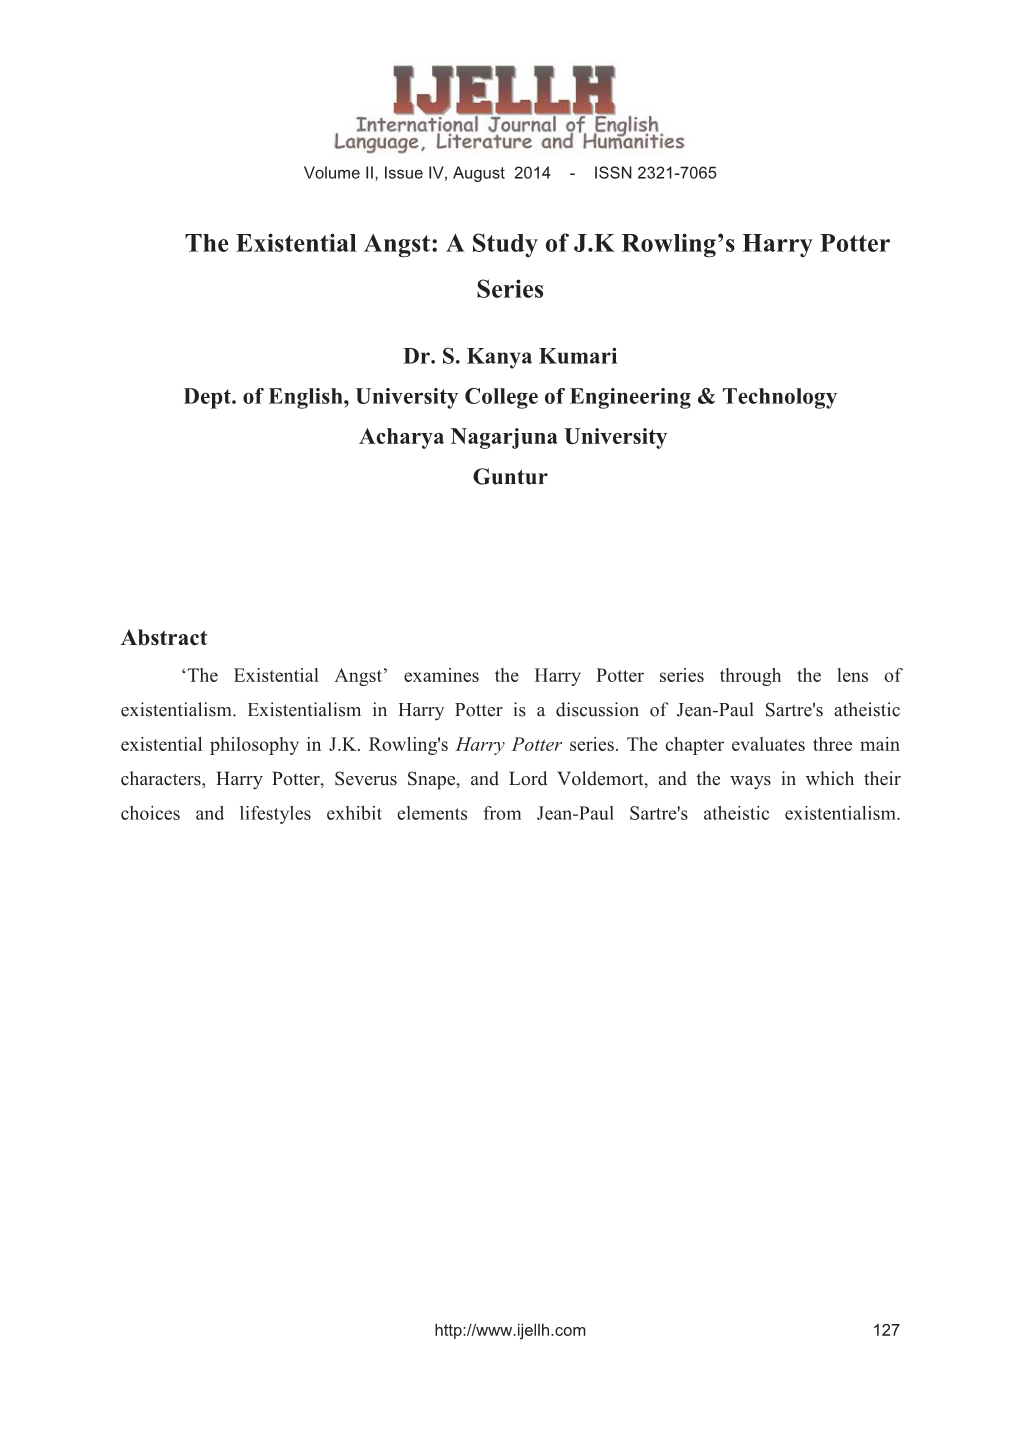 The Existential Angst: a Study of J.K Rowling's Harry Potter Series